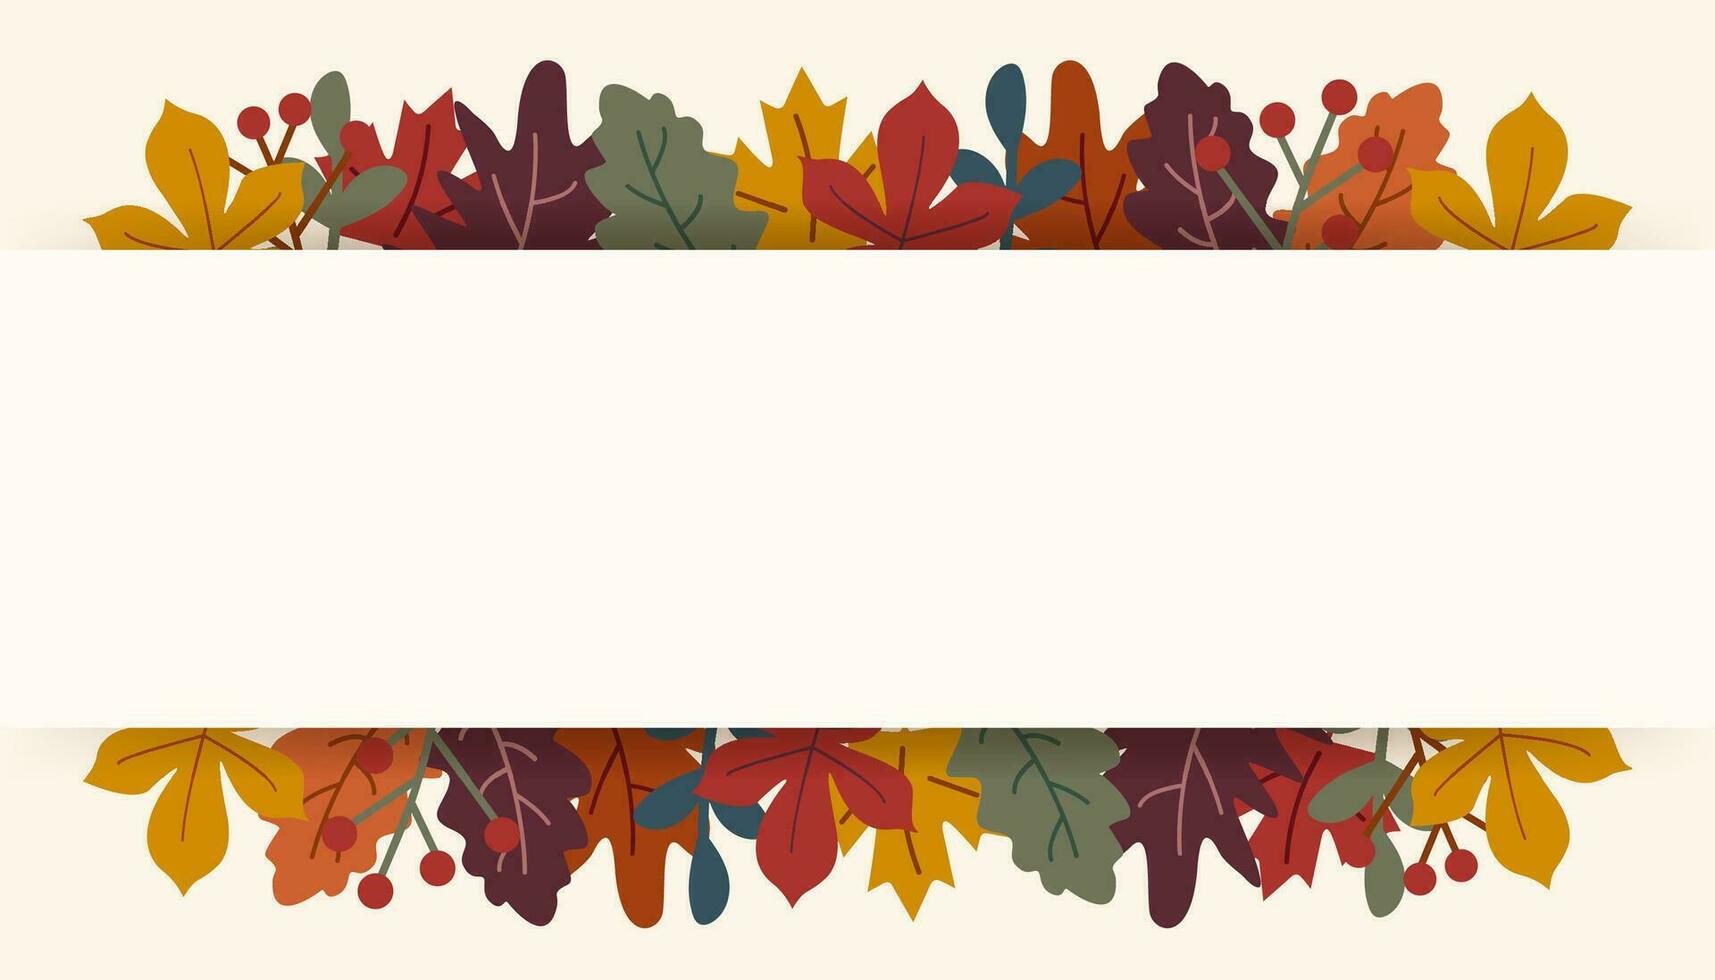 Autumn seasonal background with border made of fallen autumn golden, red and orange colored leaves isolated on white background with place for text. Vector illustration